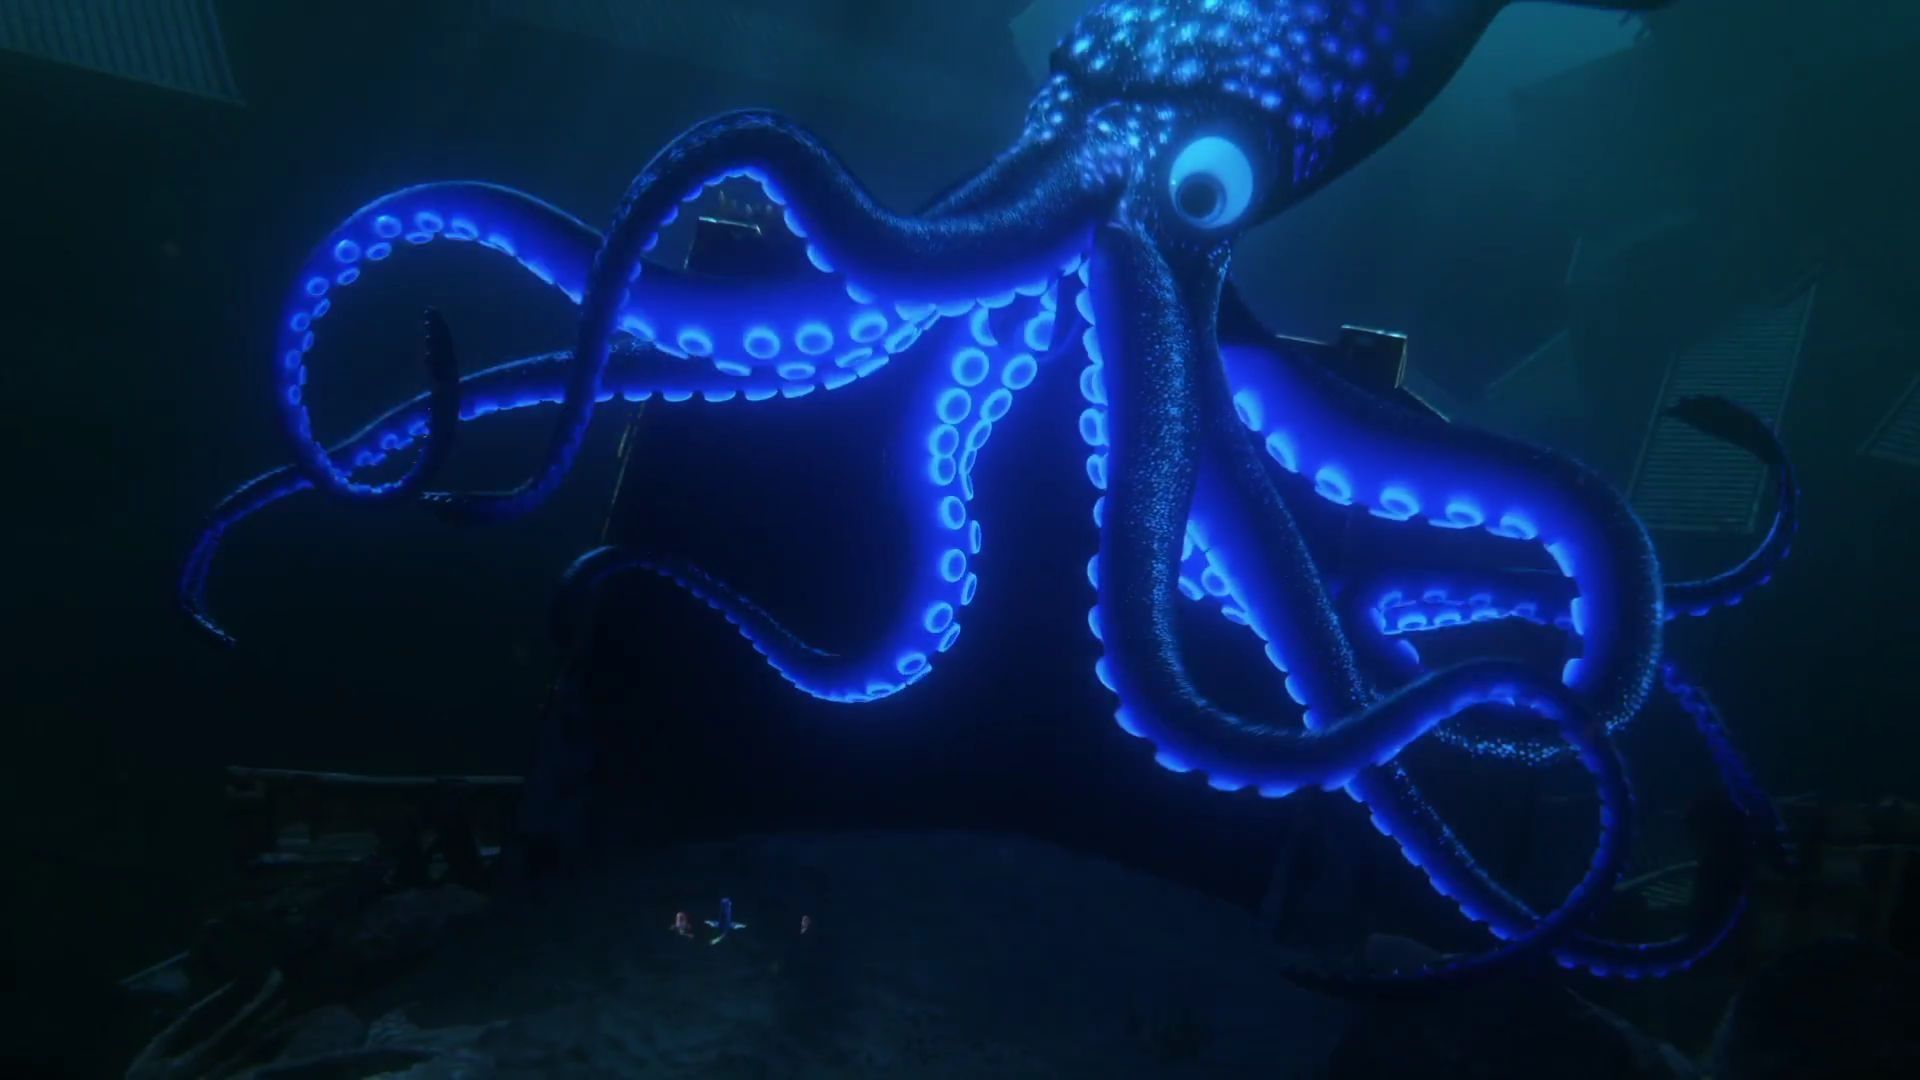 Finding Dory review: The Giant Squid that some little kids might find scary